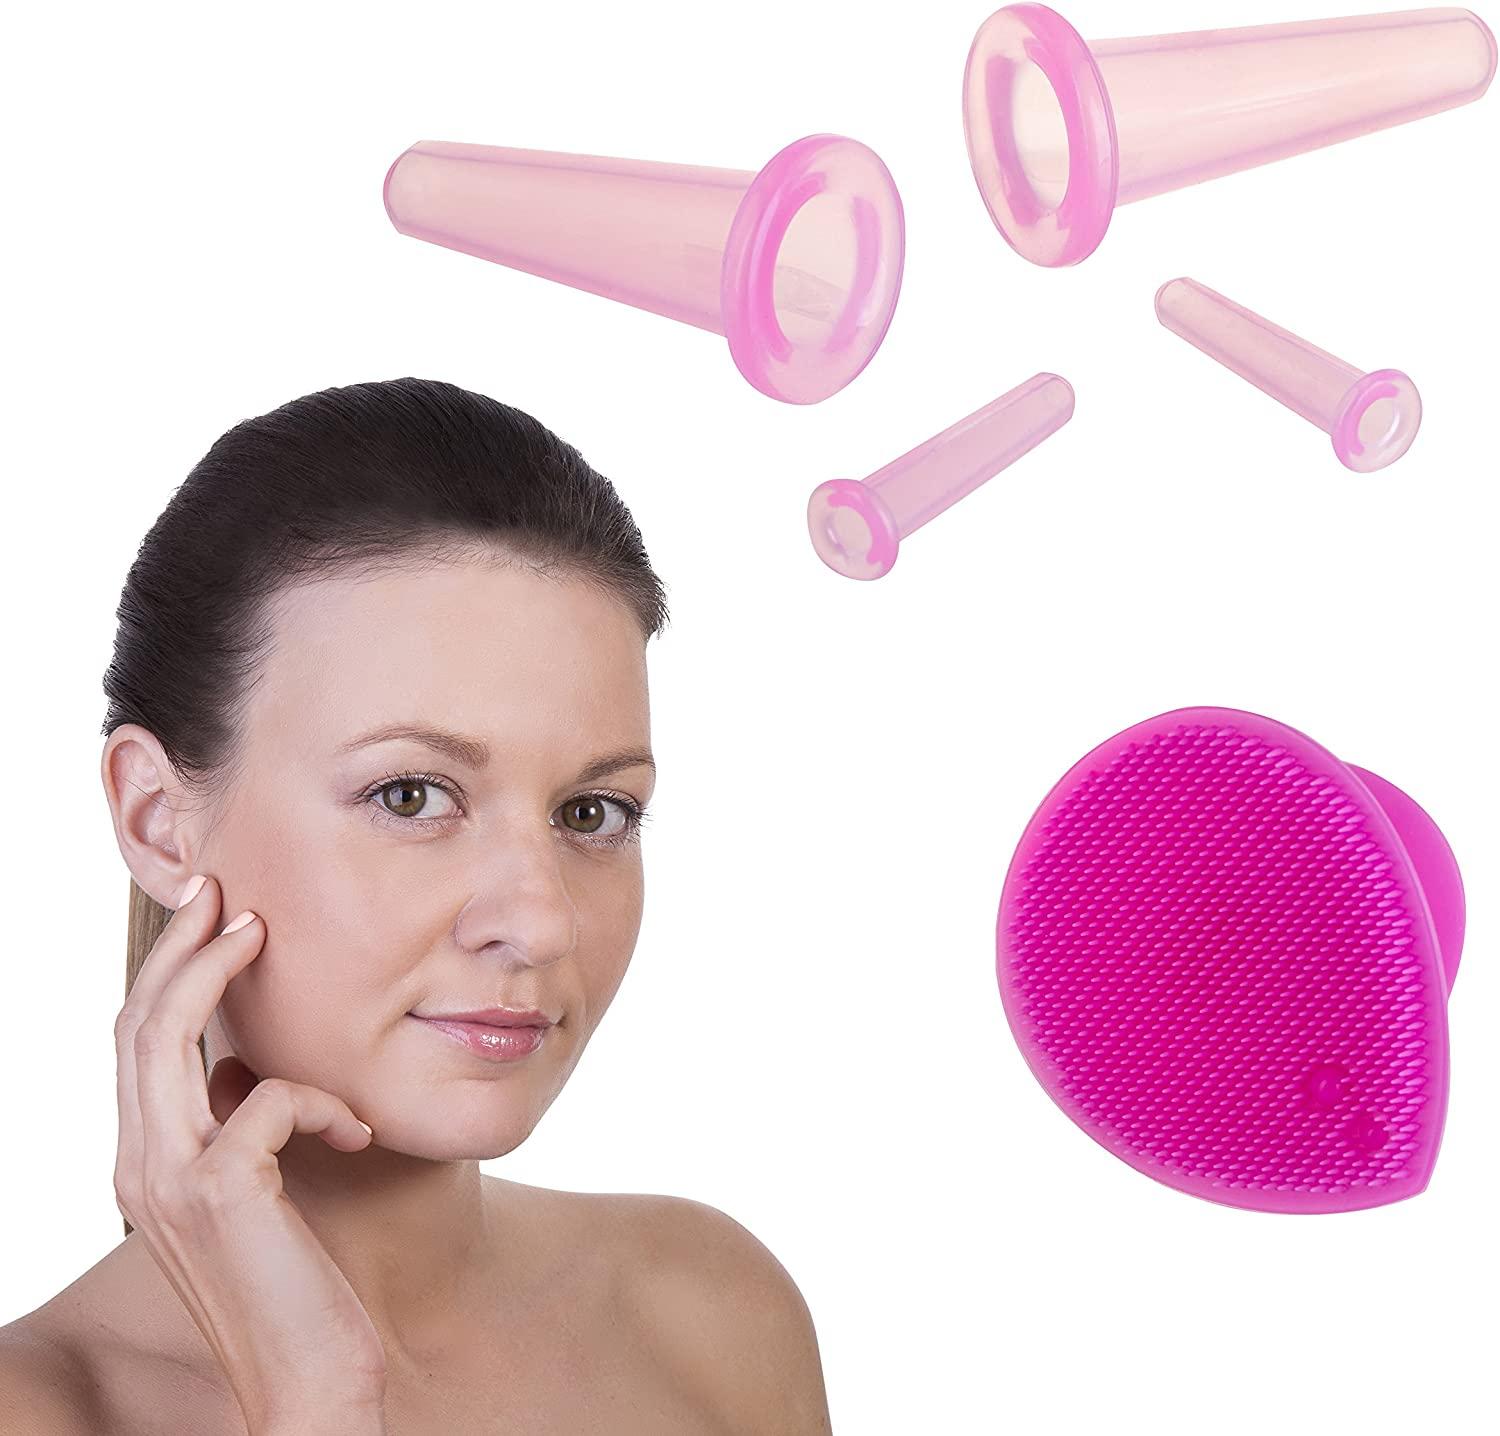 Cupping Therapy Sets - Face Cupping Set - Double Chin Reducer - Facial  Cupping System - Silicone Massage Cups - Cupping for Cellulite Kit - Ideal  to Shape your Cheeks and Chin - by Sandine (Pink)